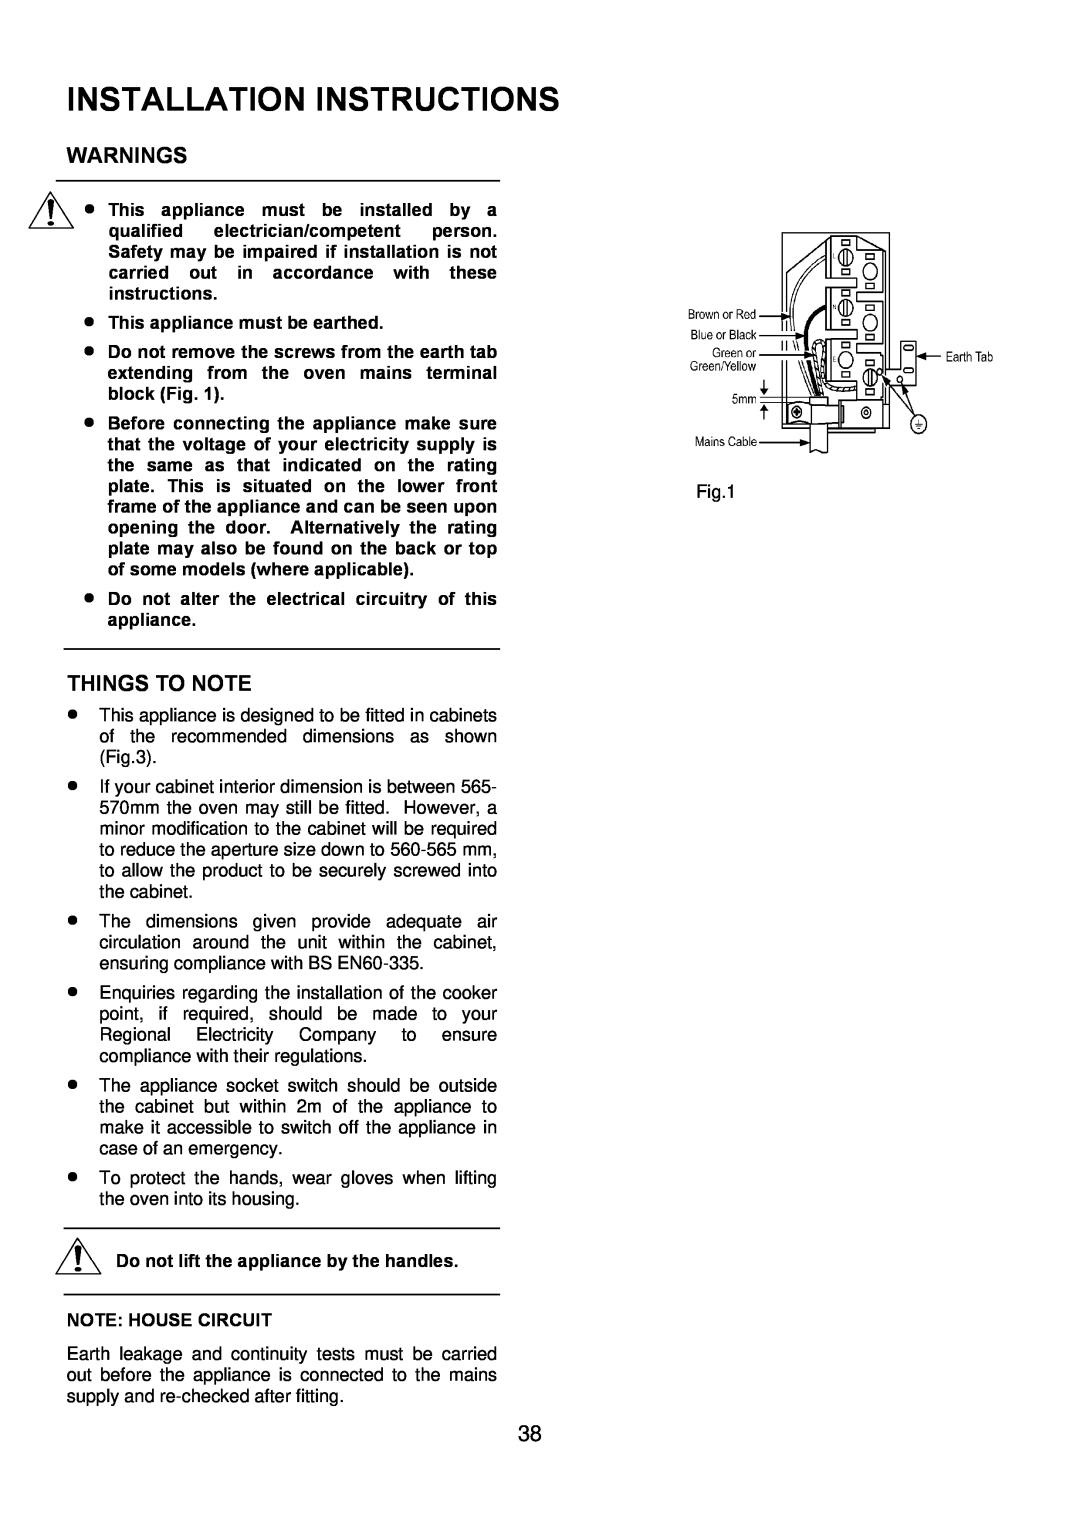 Electrolux D4101-5 Installation Instructions, Warnings, This appliance must be installed, by a, instructions, block Fig 